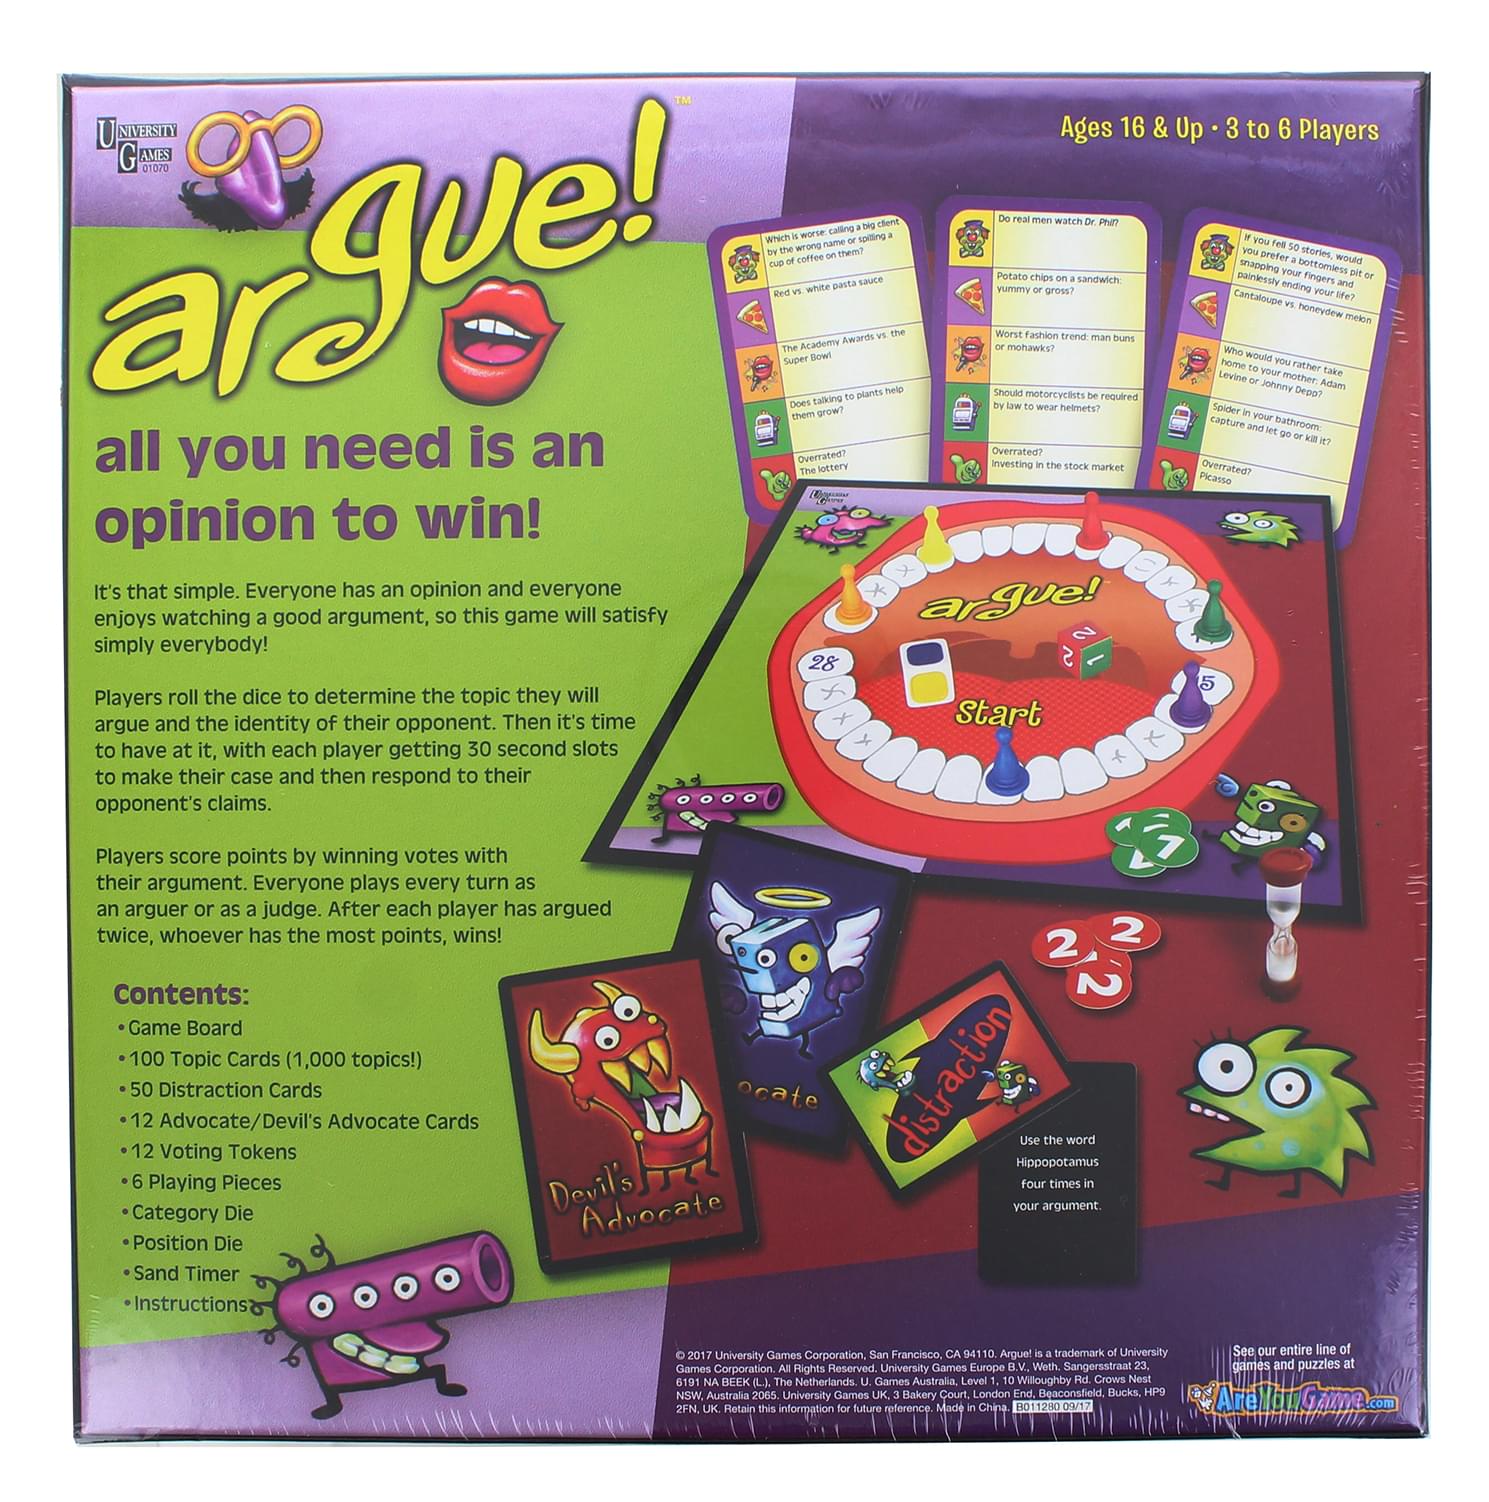 Argue! Multi-Player Adult Party Game | For 3-6 Players